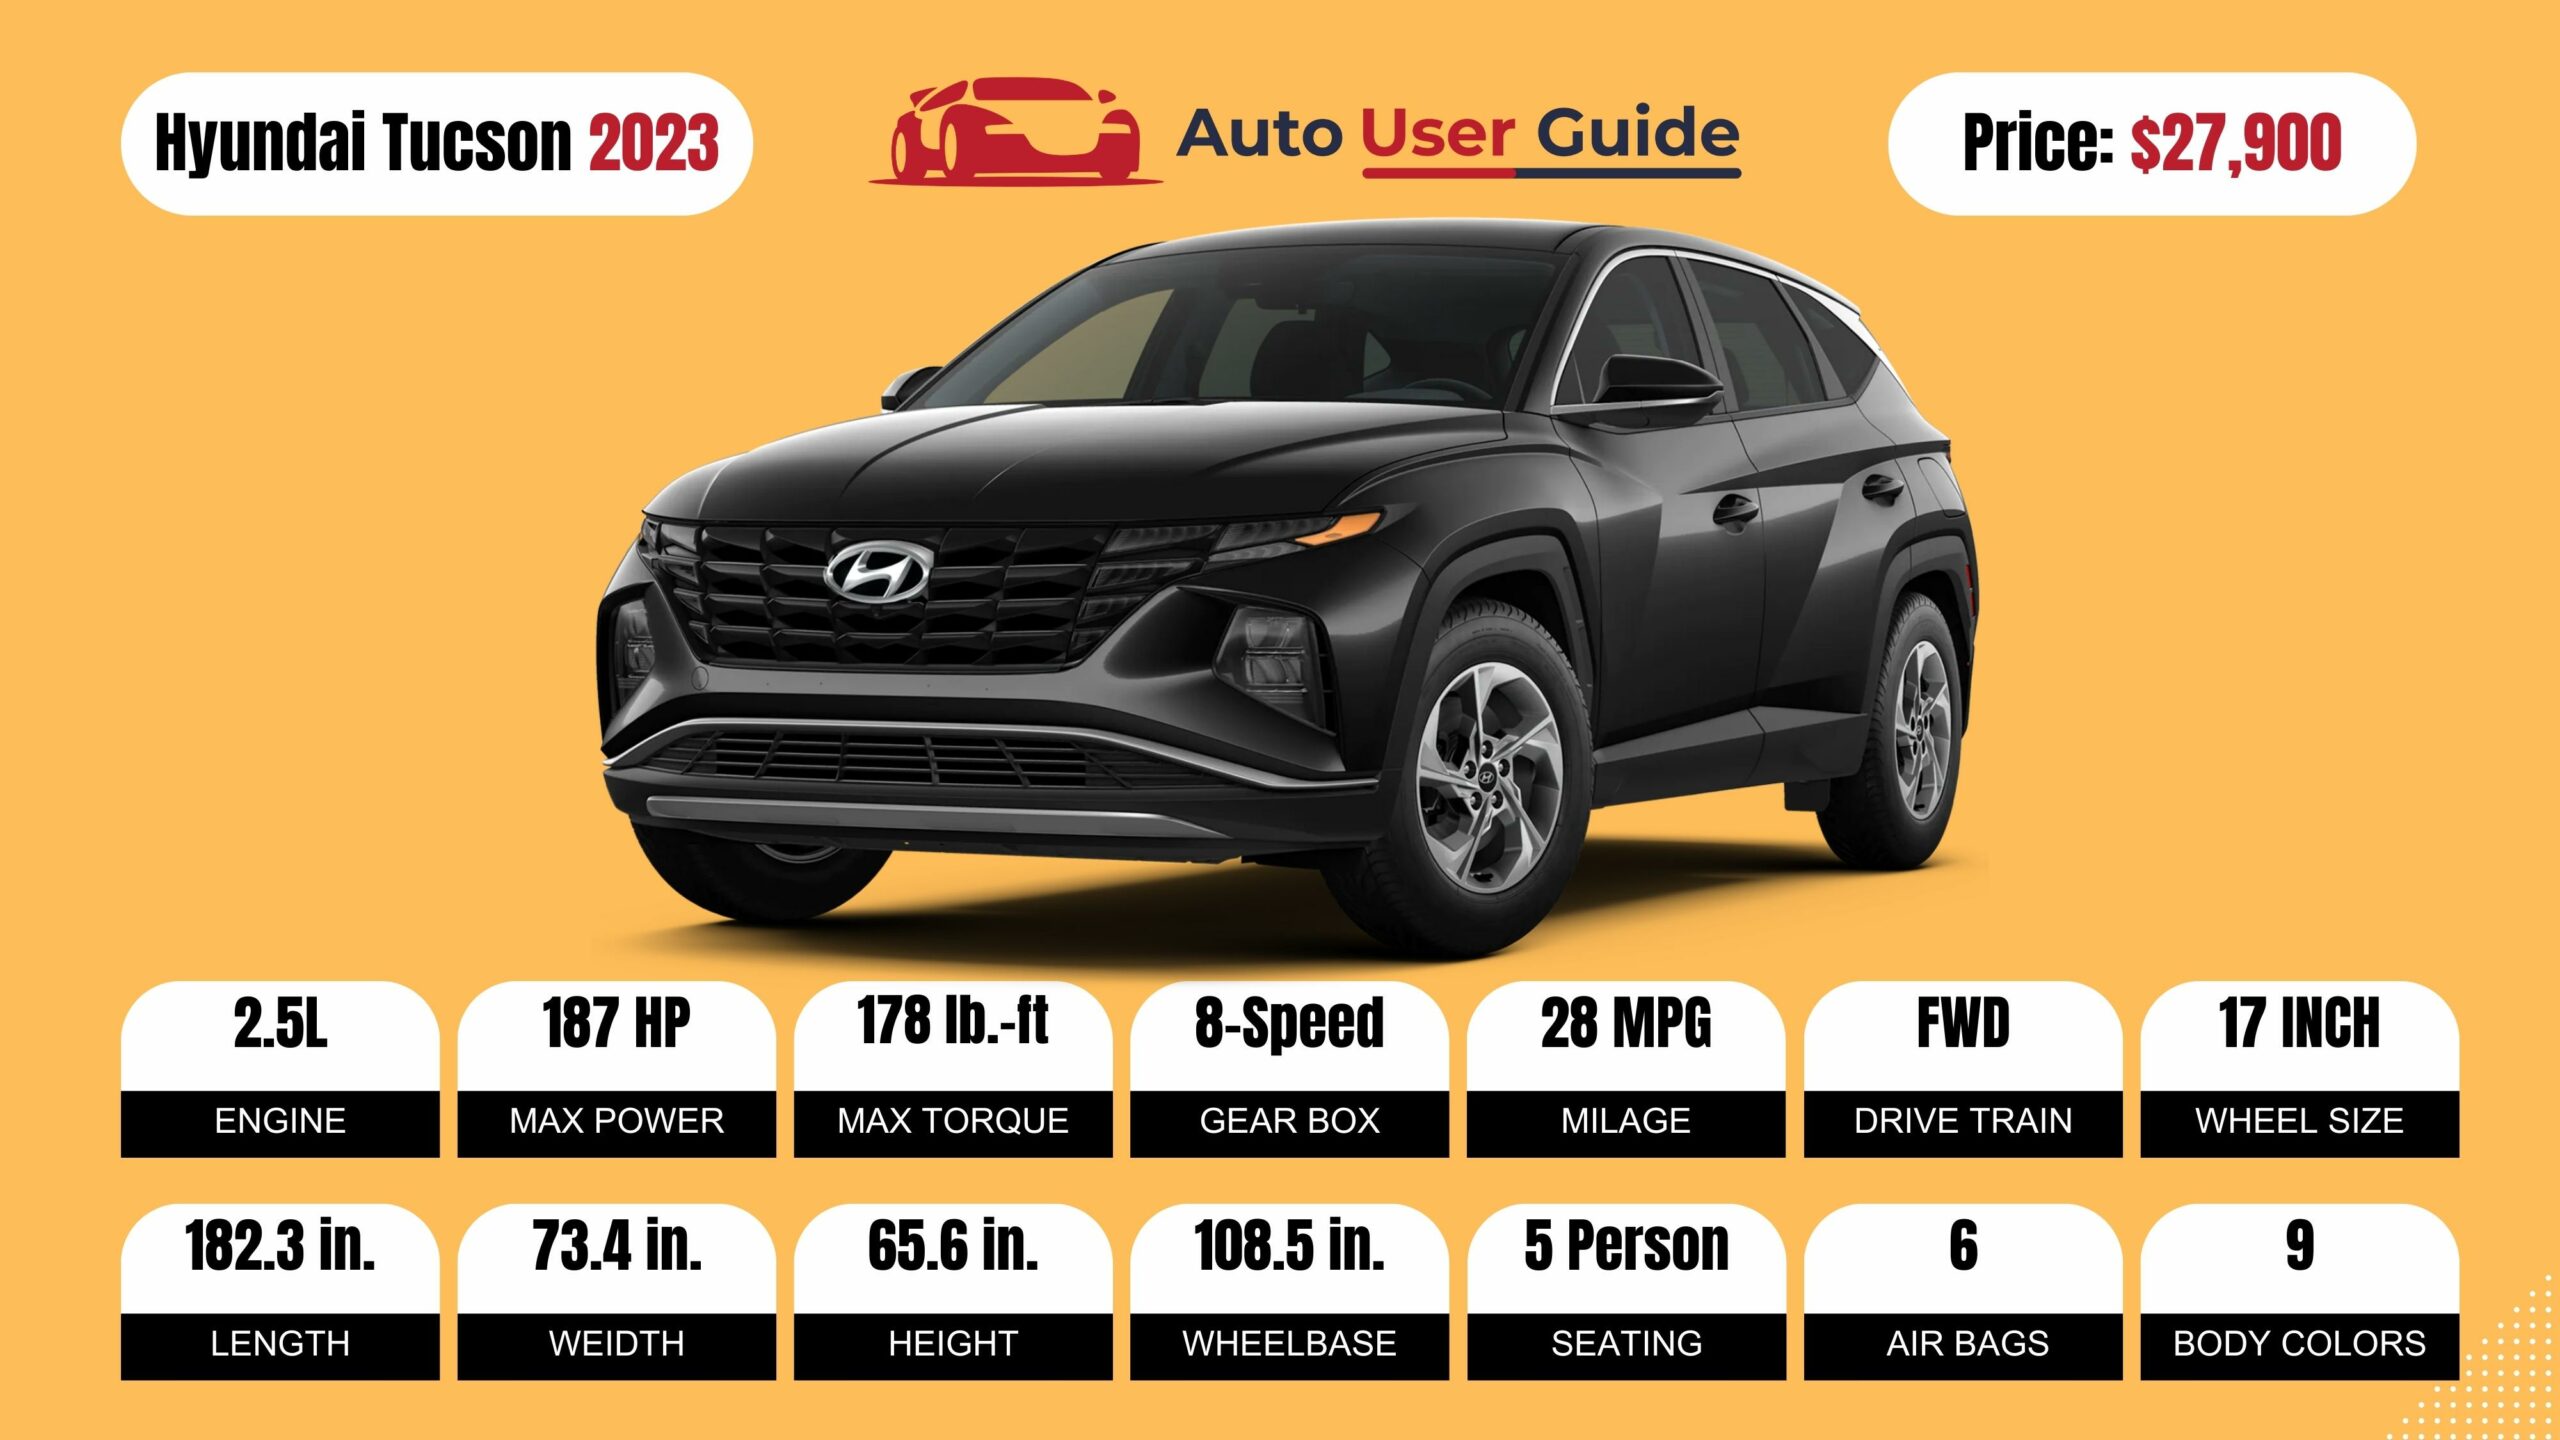 2023 2024 Hyundai Tucson Review, Specs, Price and Mileage (Brochure